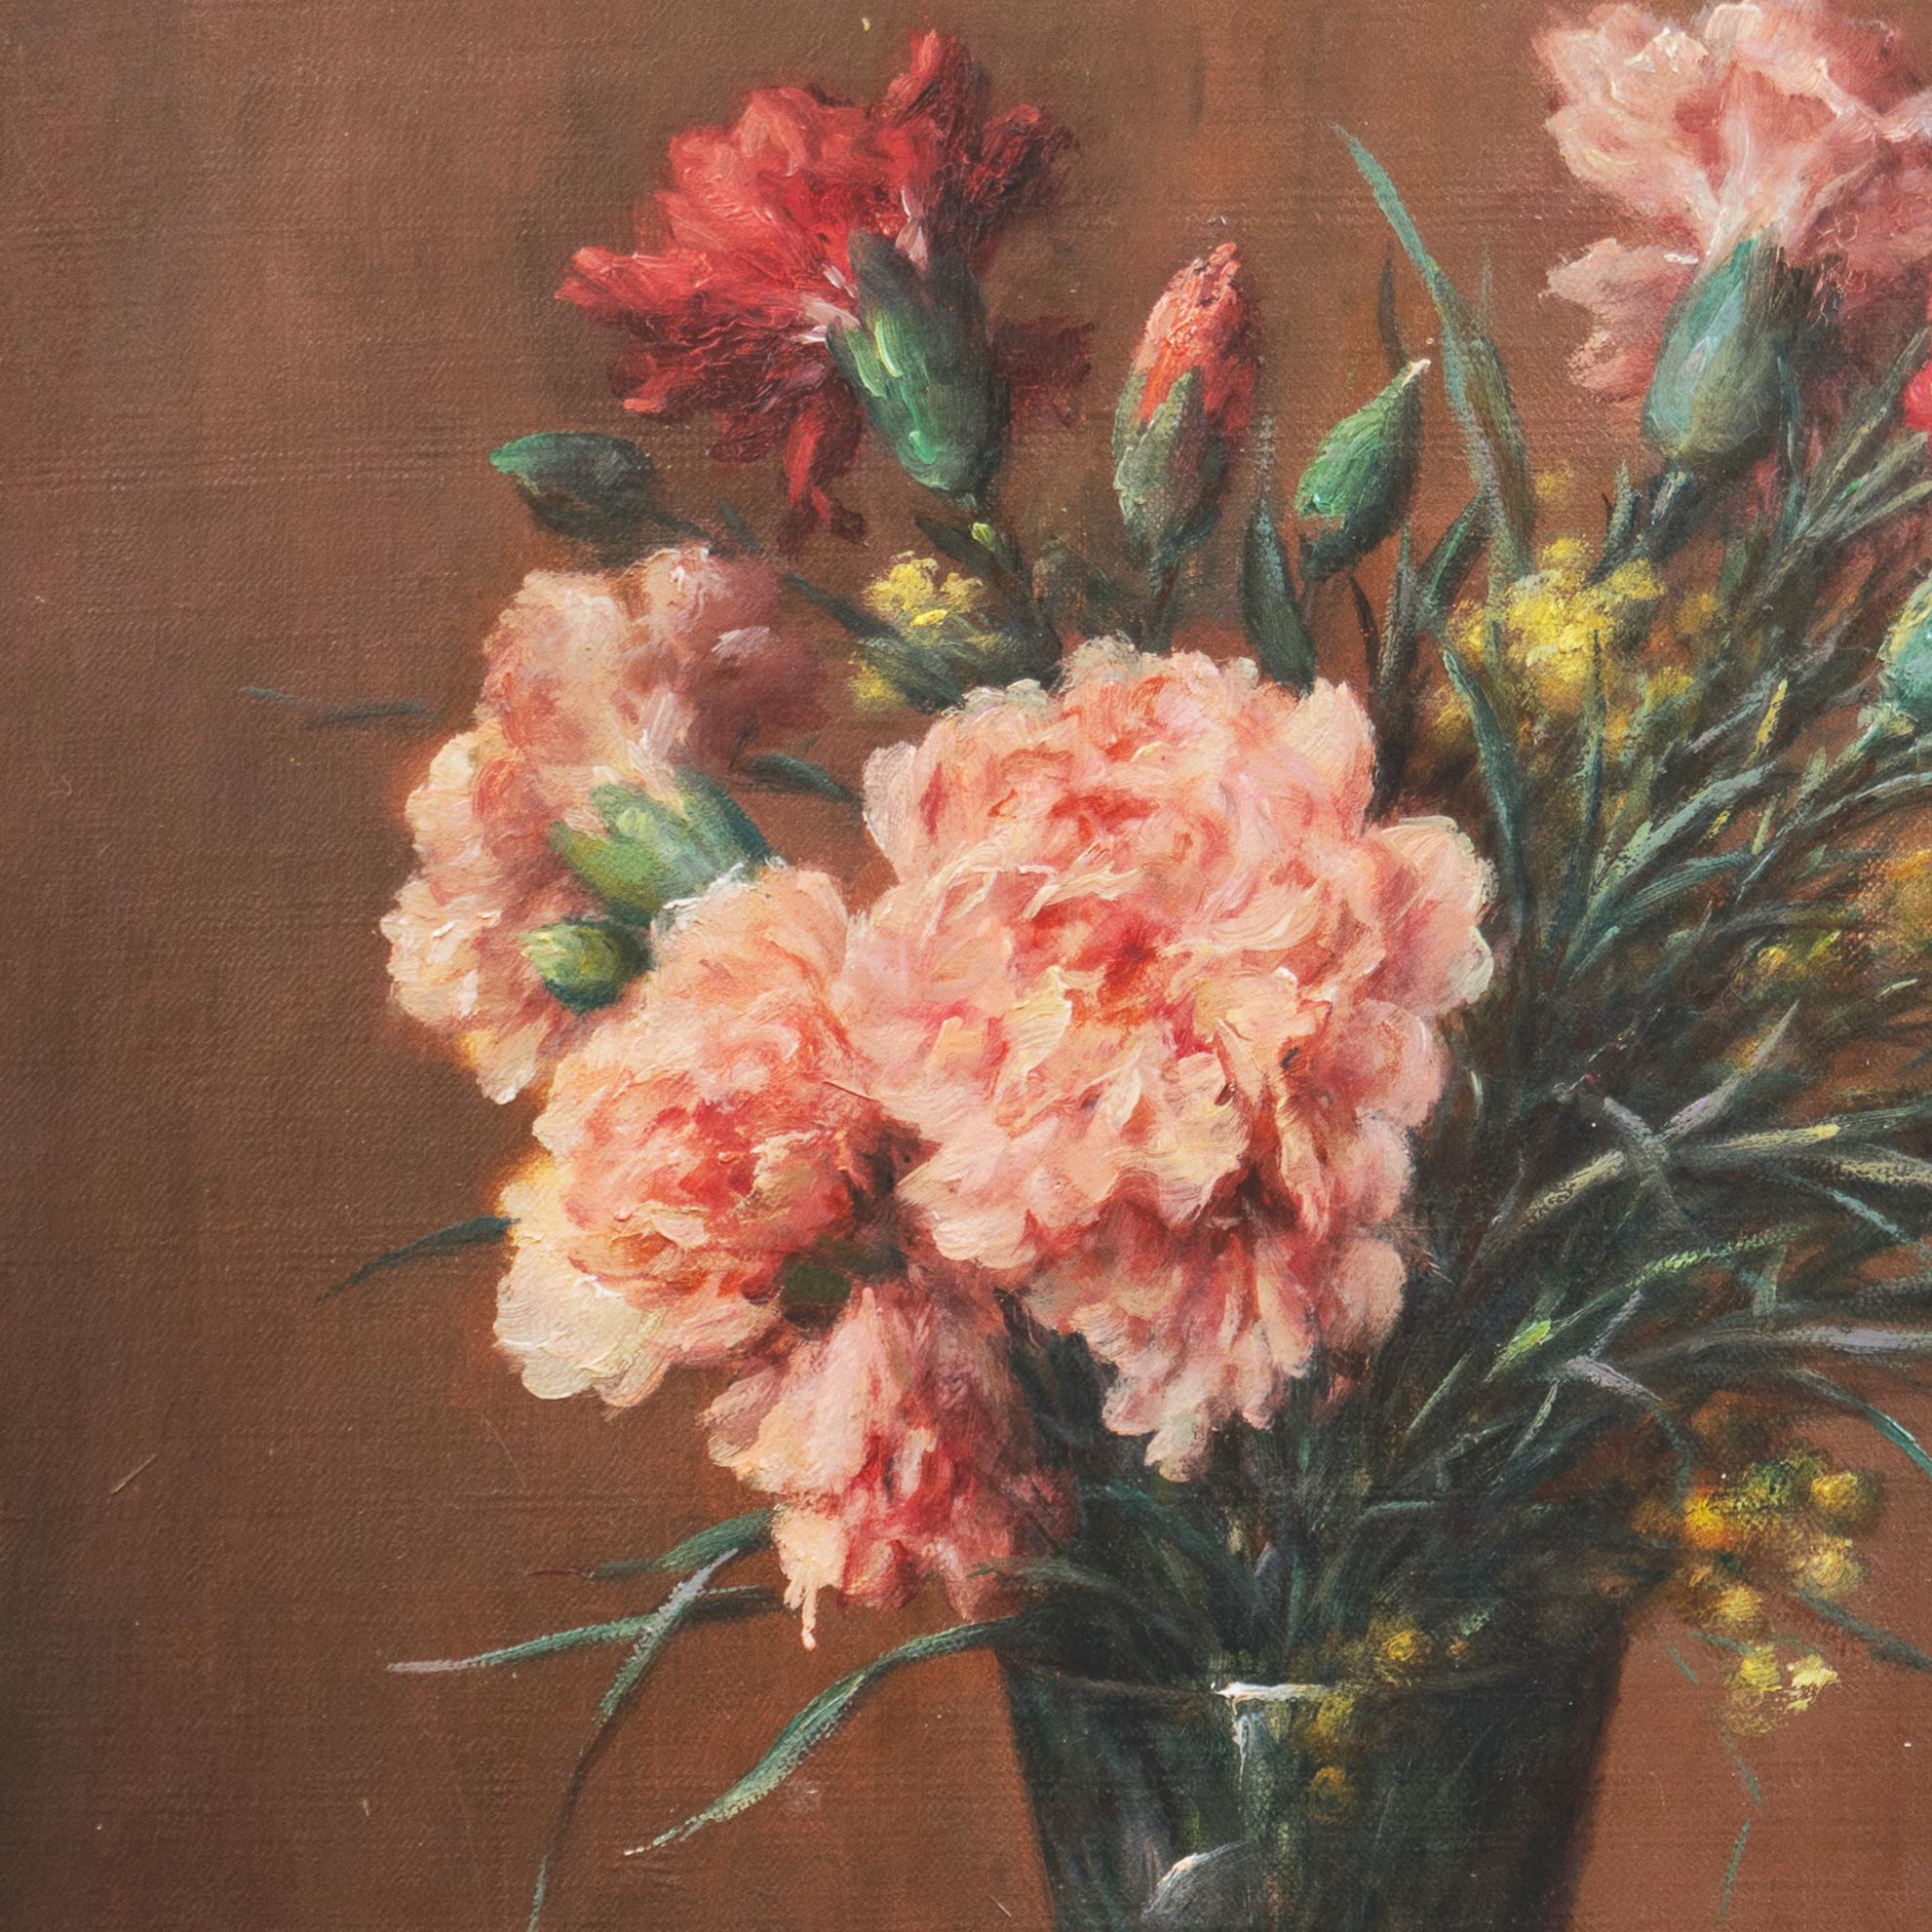 Signed lower right, 'E. Damois' for Ernest Emile Damois (French, 19/20th century) and painted circa 1915. 
Framed dimensions: 20 x 26 inches.

A  closely-observed and delicately realized, oil still-life of pink and red carnations shown informally